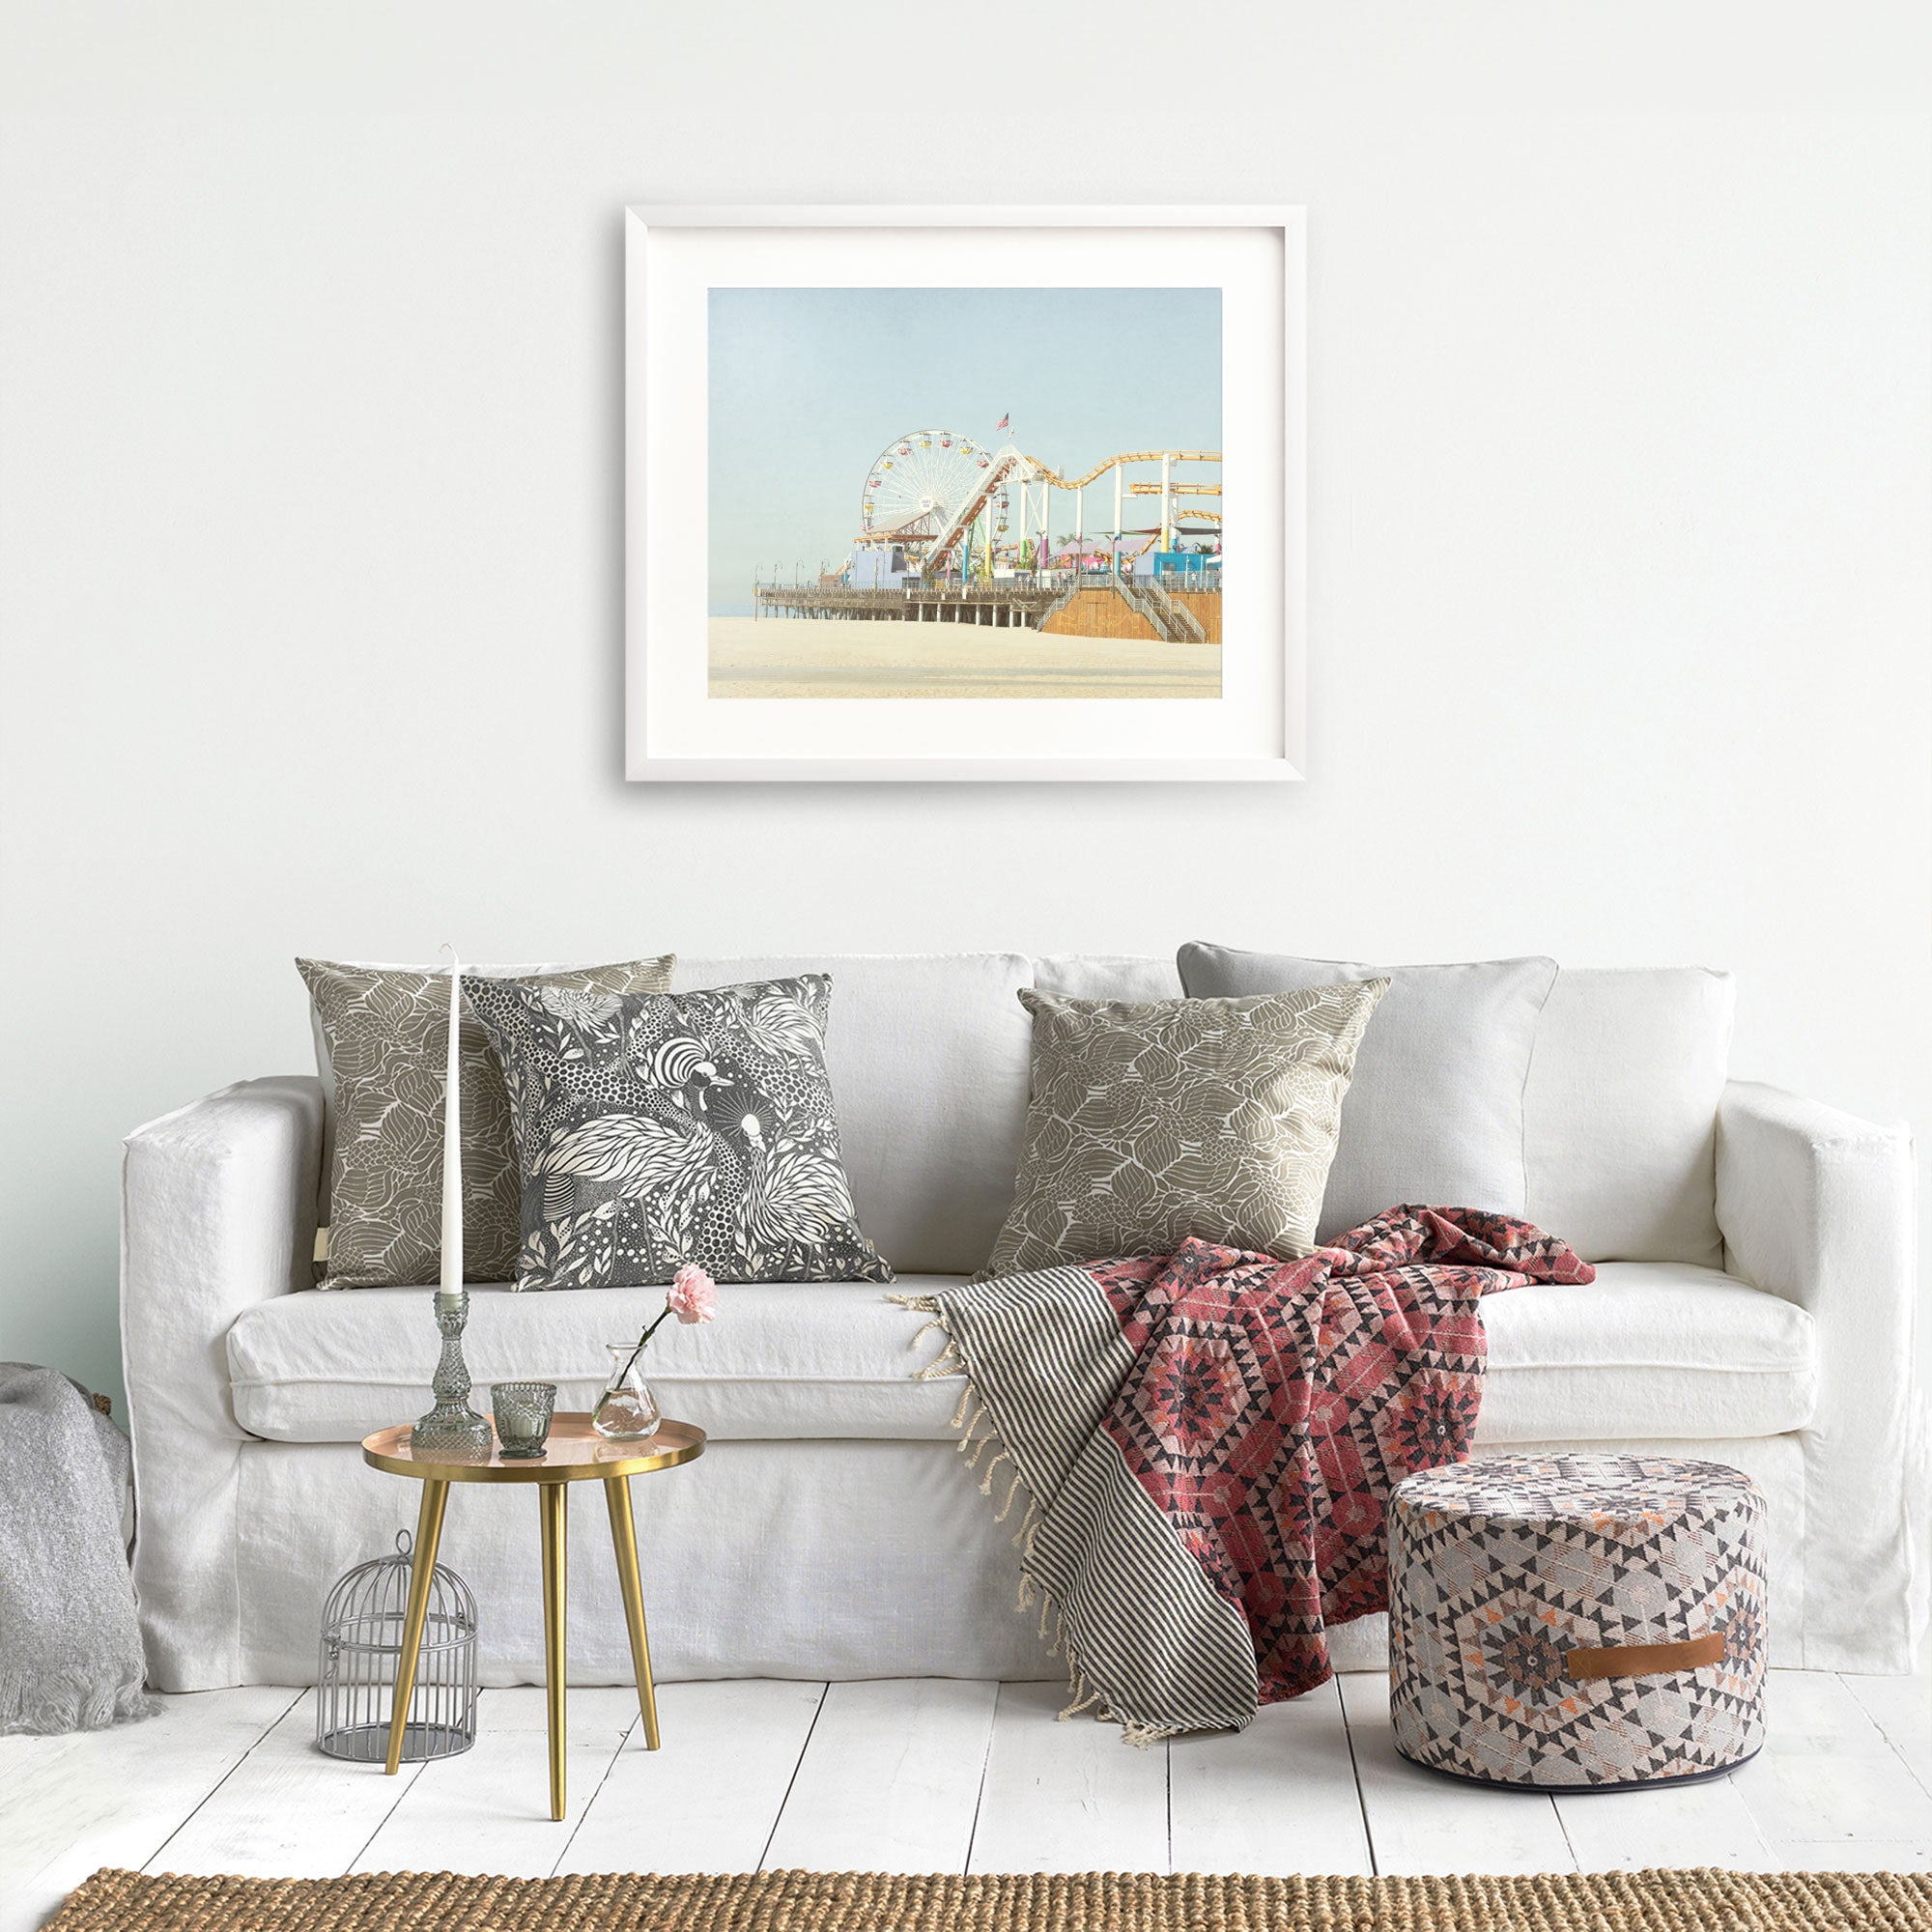 A cozy living room with a white sofa adorned with patterned pillows, a red throw blanket, a small round table, and a birdcage decor item, featuring a framed painting of the Offley Green California Print, 'Santa Monica Pier'